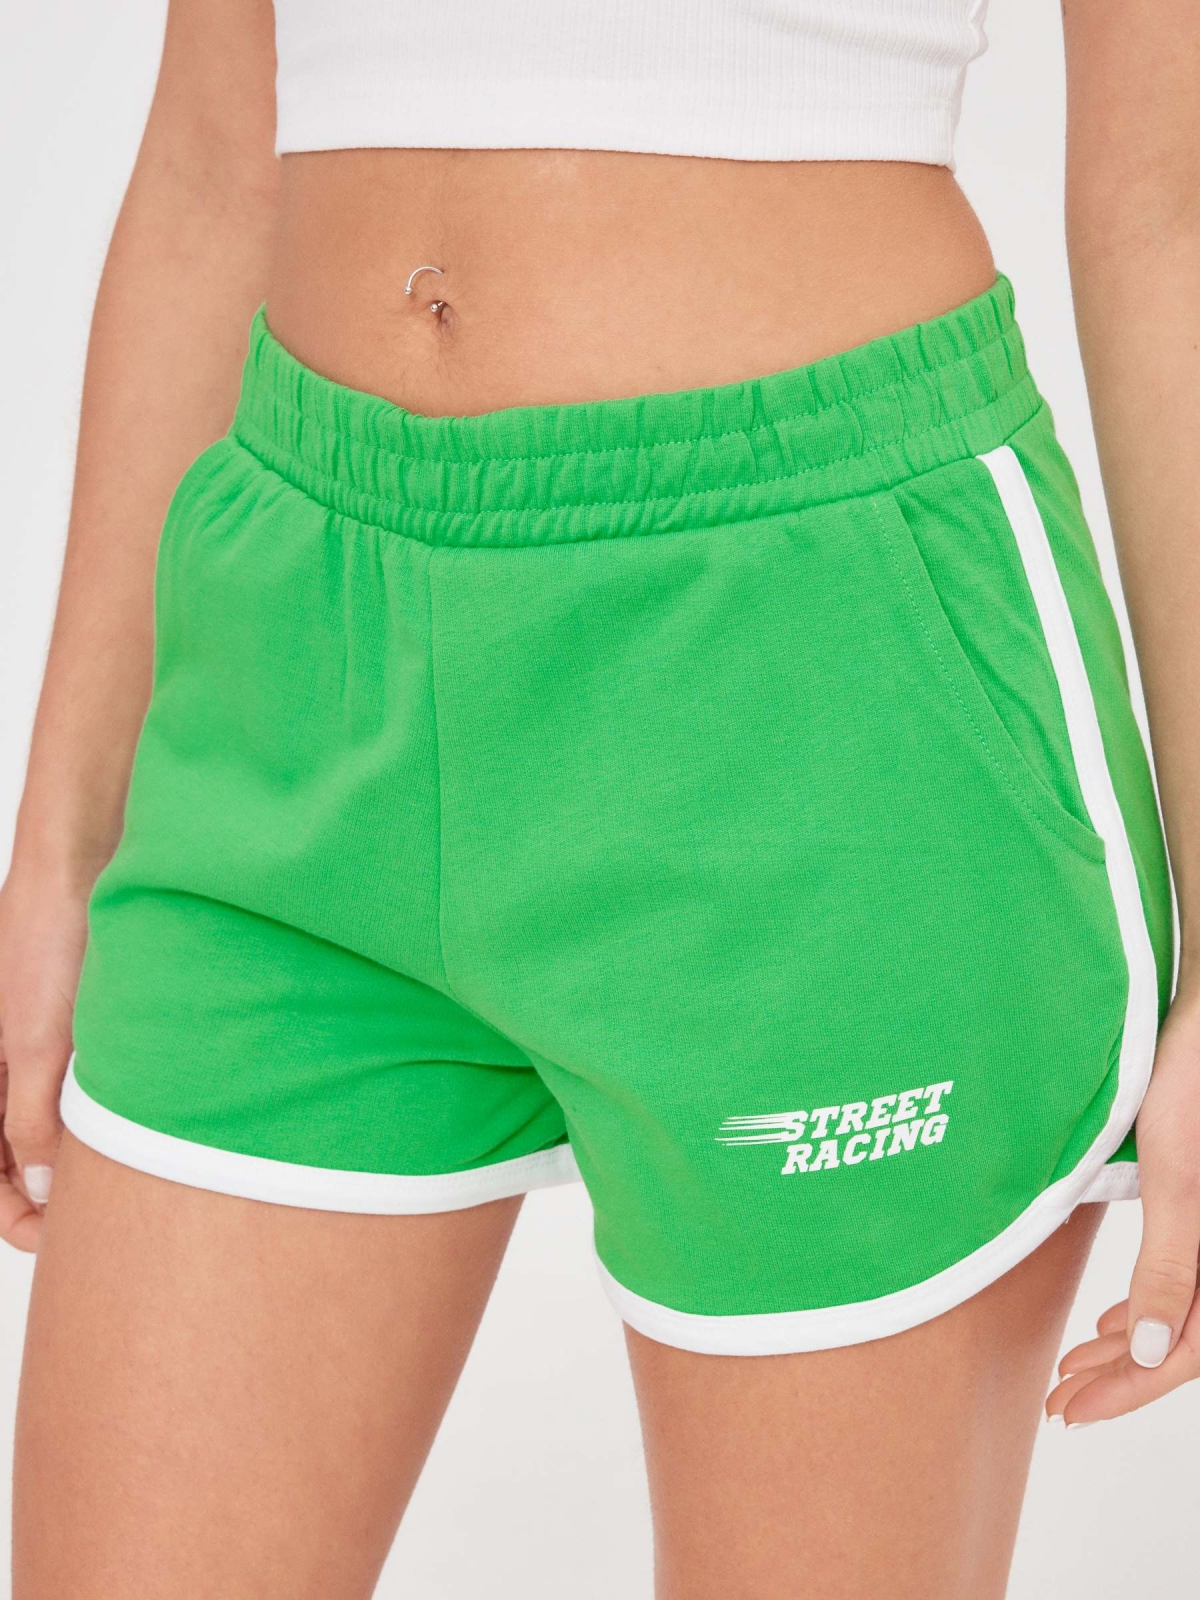 Sport shorts with pockets mint detail view